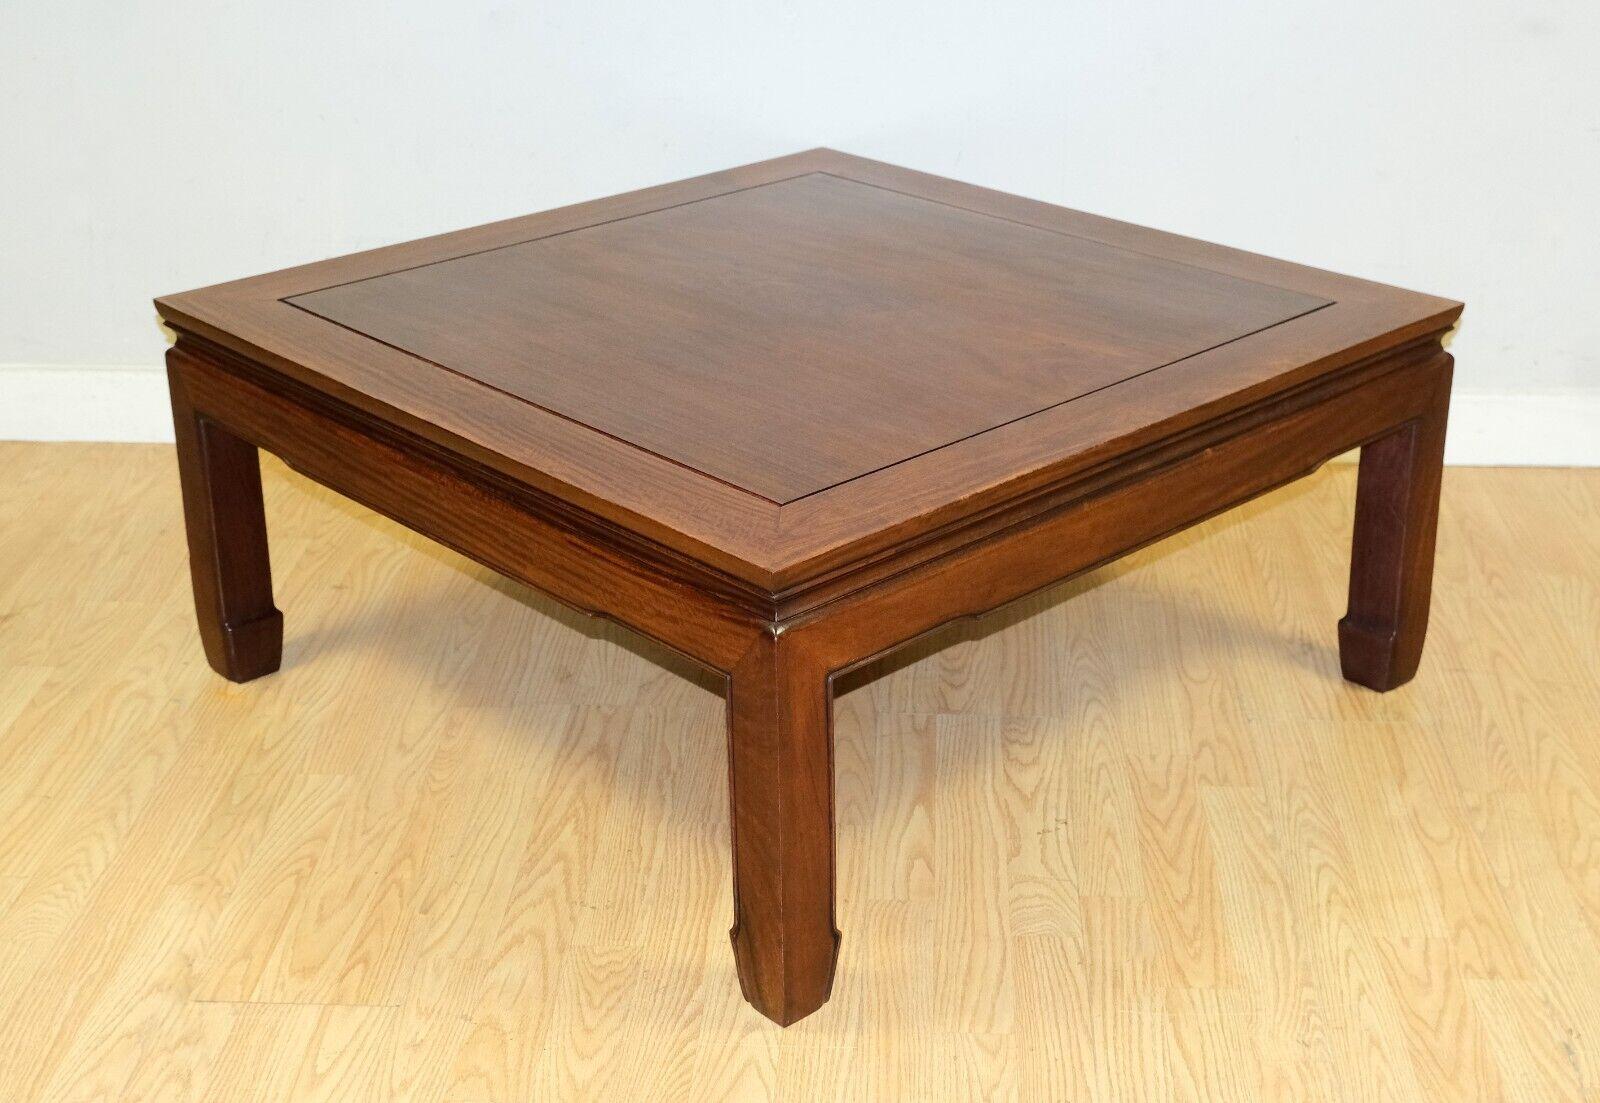 Chinese Export CHARMING 20TH CENTURY HARDWOOD MiNG STYLE CHiNESE COFFEE TABLE ON HOOF FEET